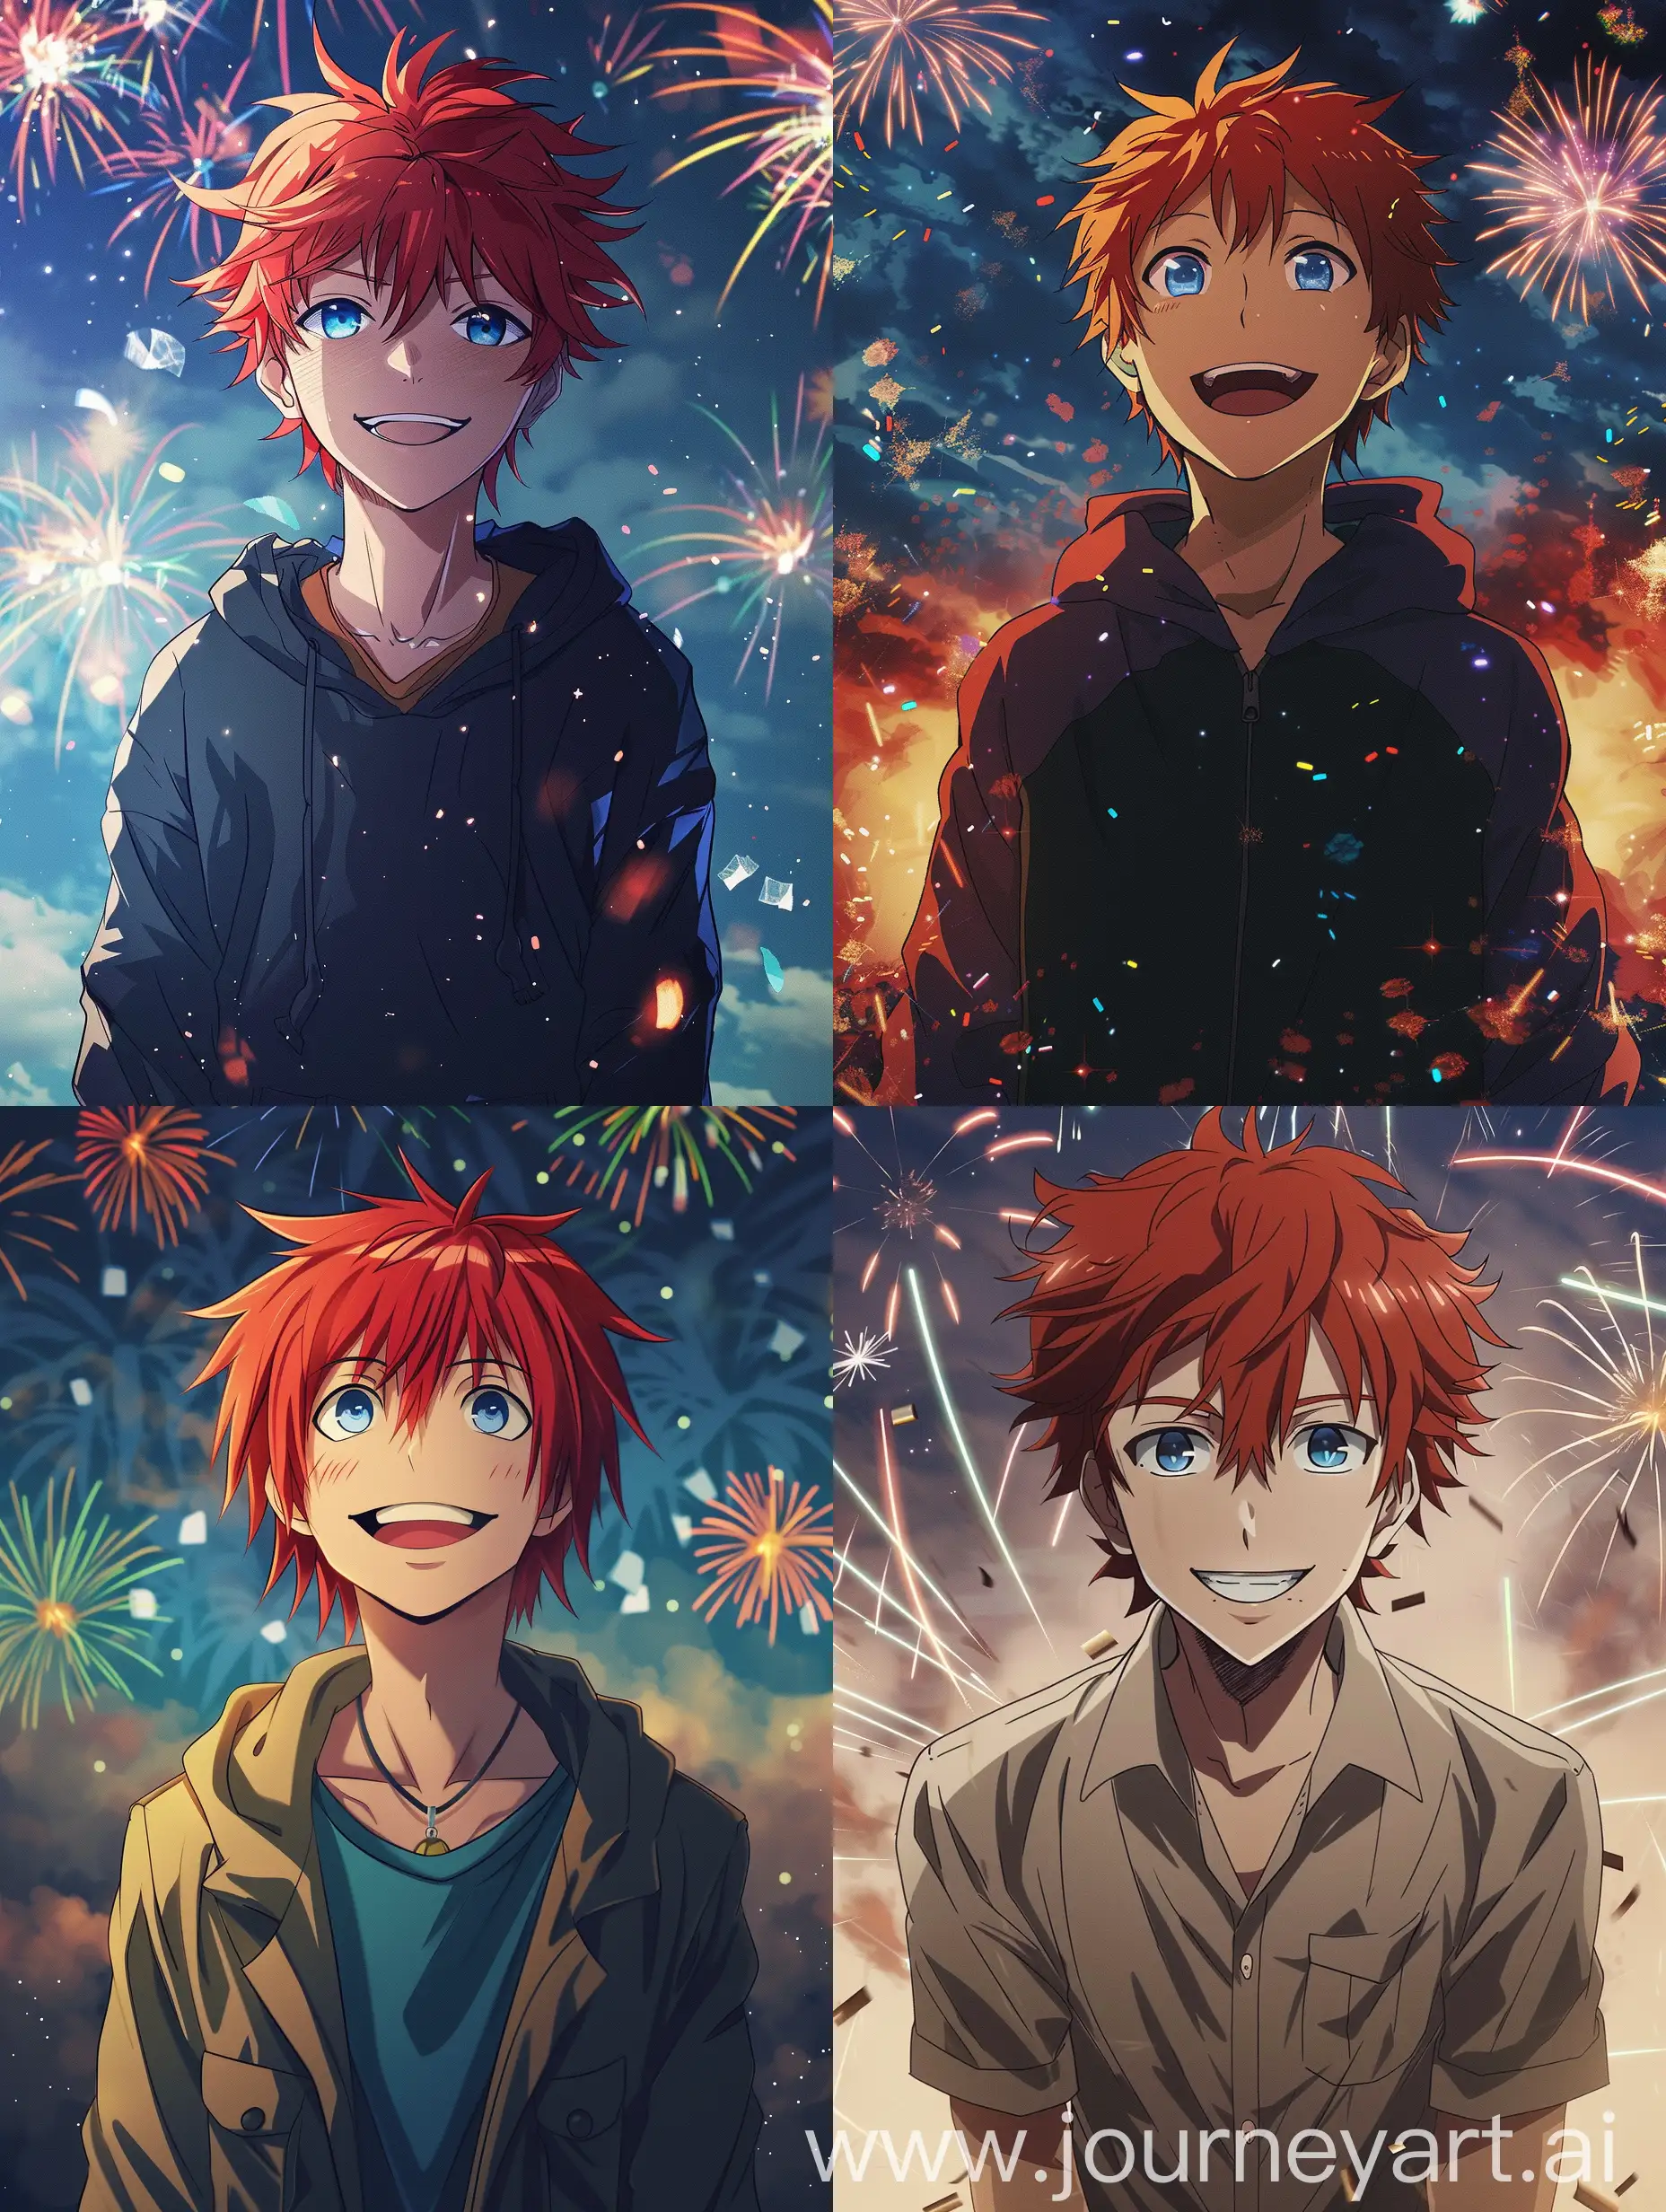 Cheerful-RedHaired-Young-Man-Enjoying-Holiday-Fireworks-in-Anime-Style